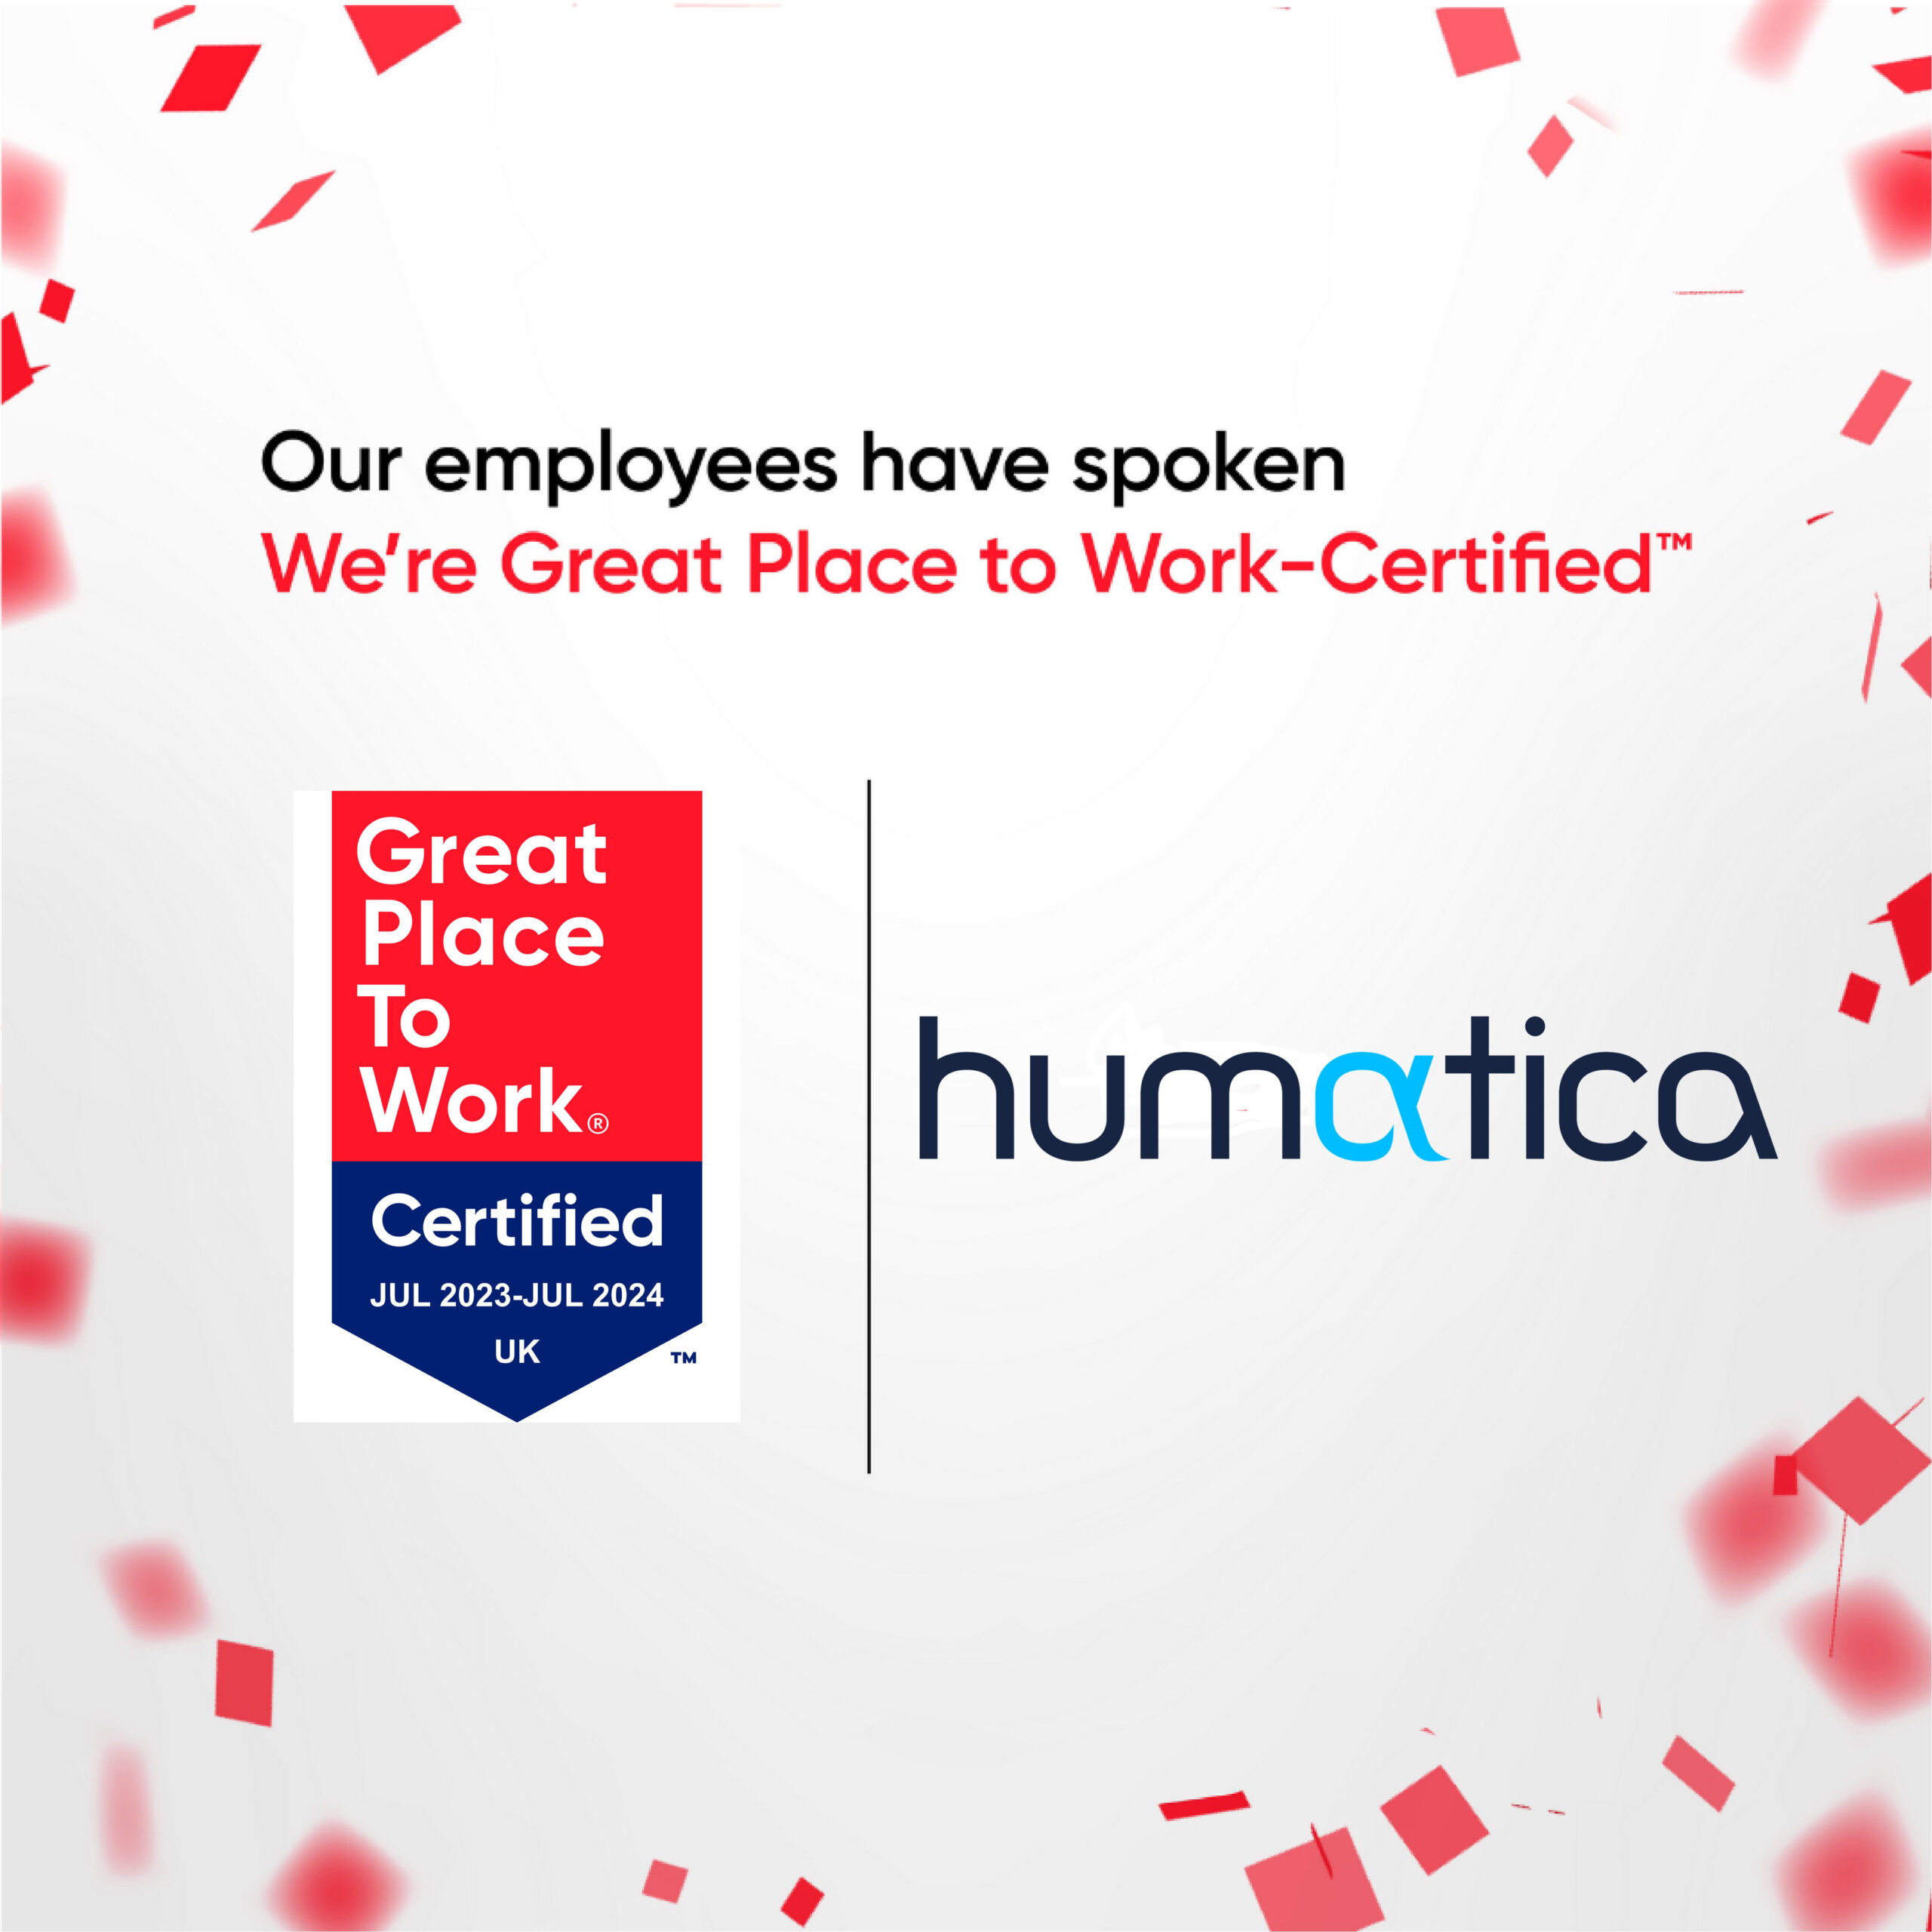 Humatica Earns Accreditation as a Great Place to Work-Certified™ Company!